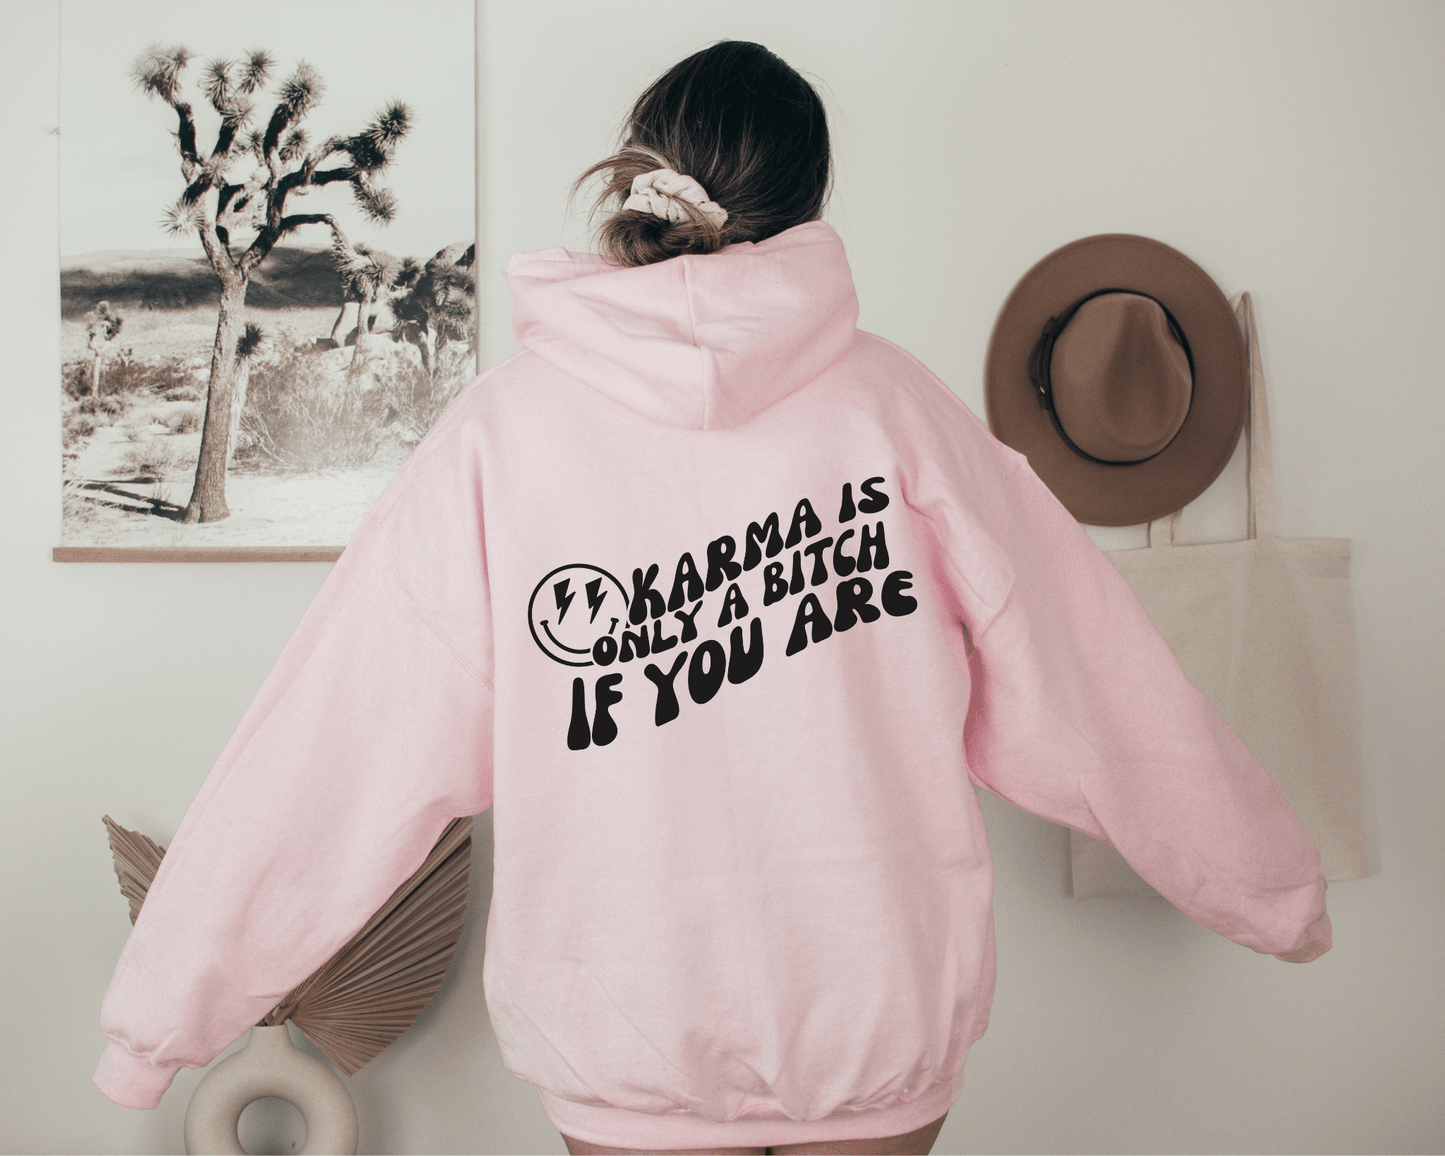 Karma is Only a Bitch if You Are hoodie in Pink, back of hoodie.